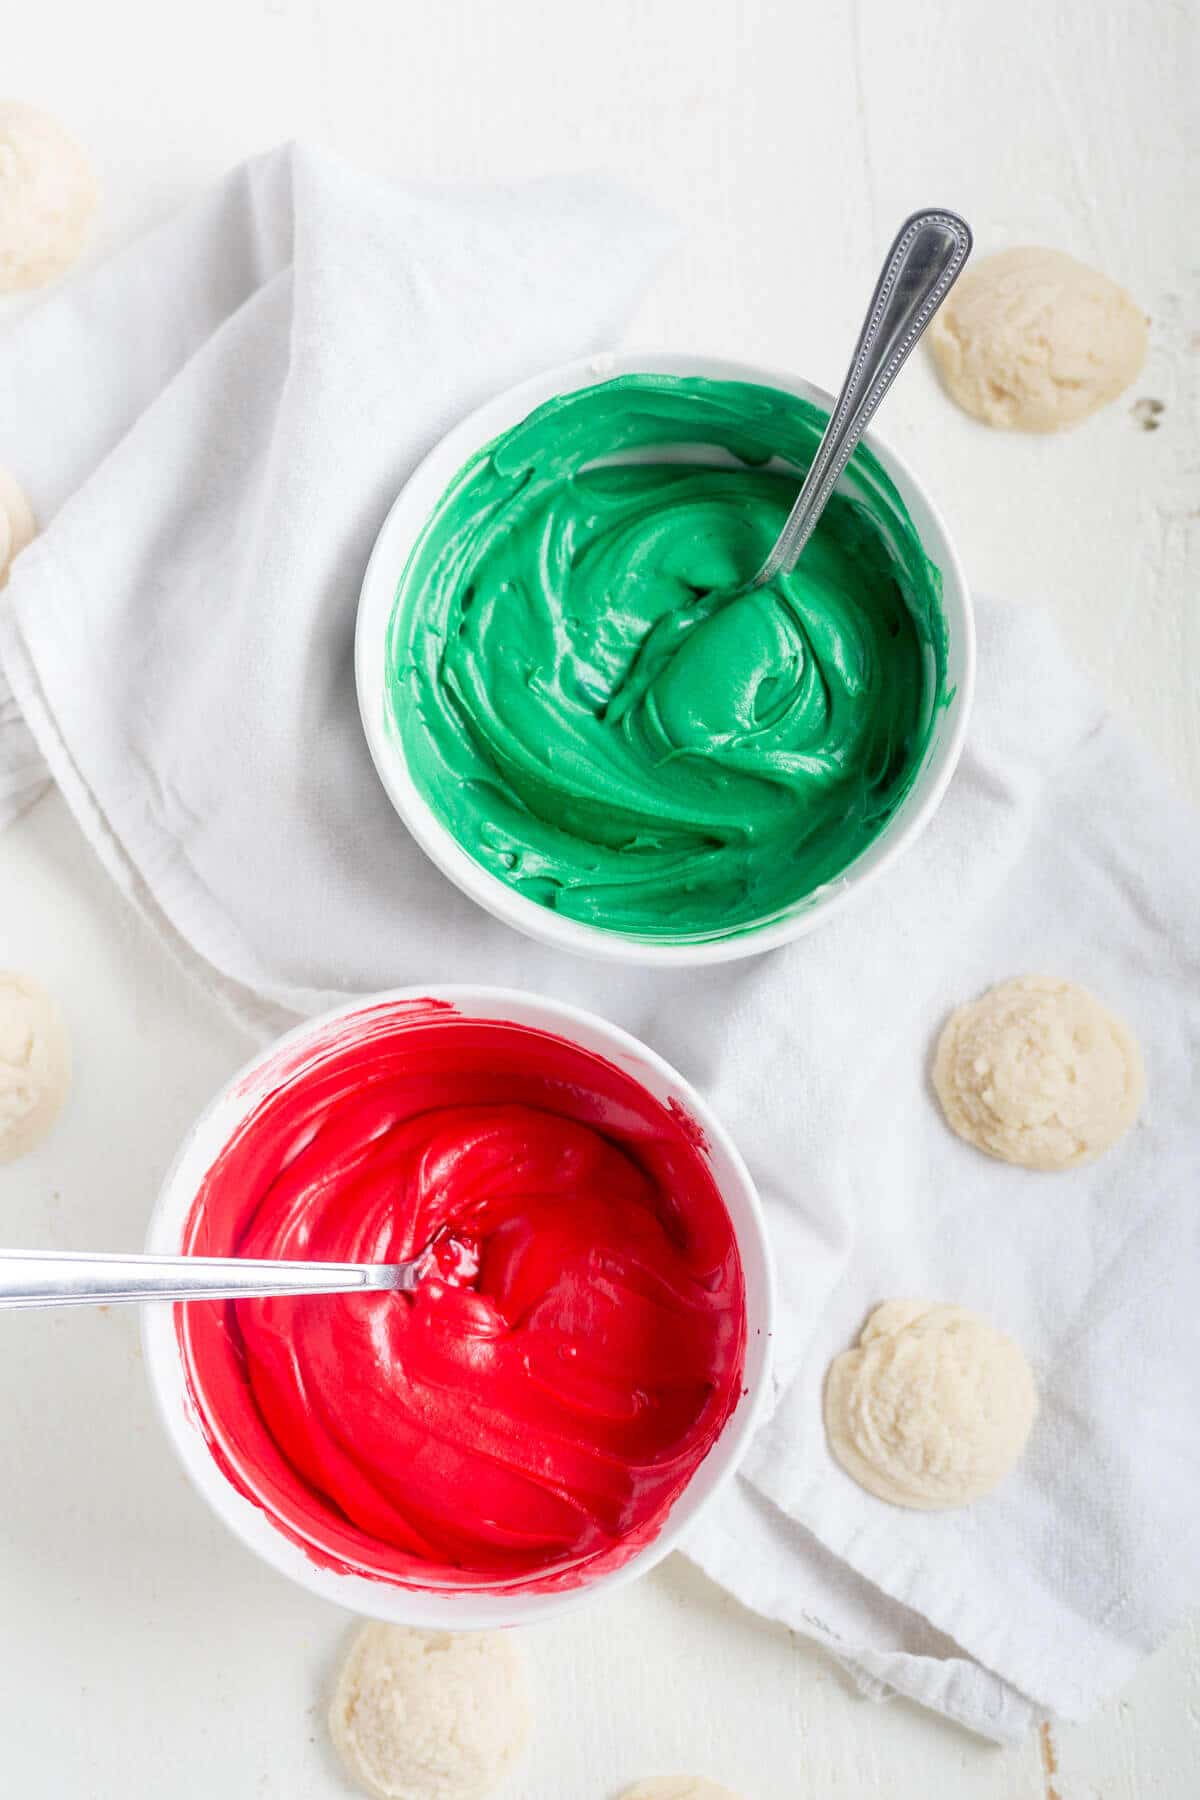 Melting moments sandwich cookies are a must-make Christmas cookie! They're tiny cookies sandwiched with a thick and creamy frosting dyed red and green. This festive cookie recipe will be a new family favorite.